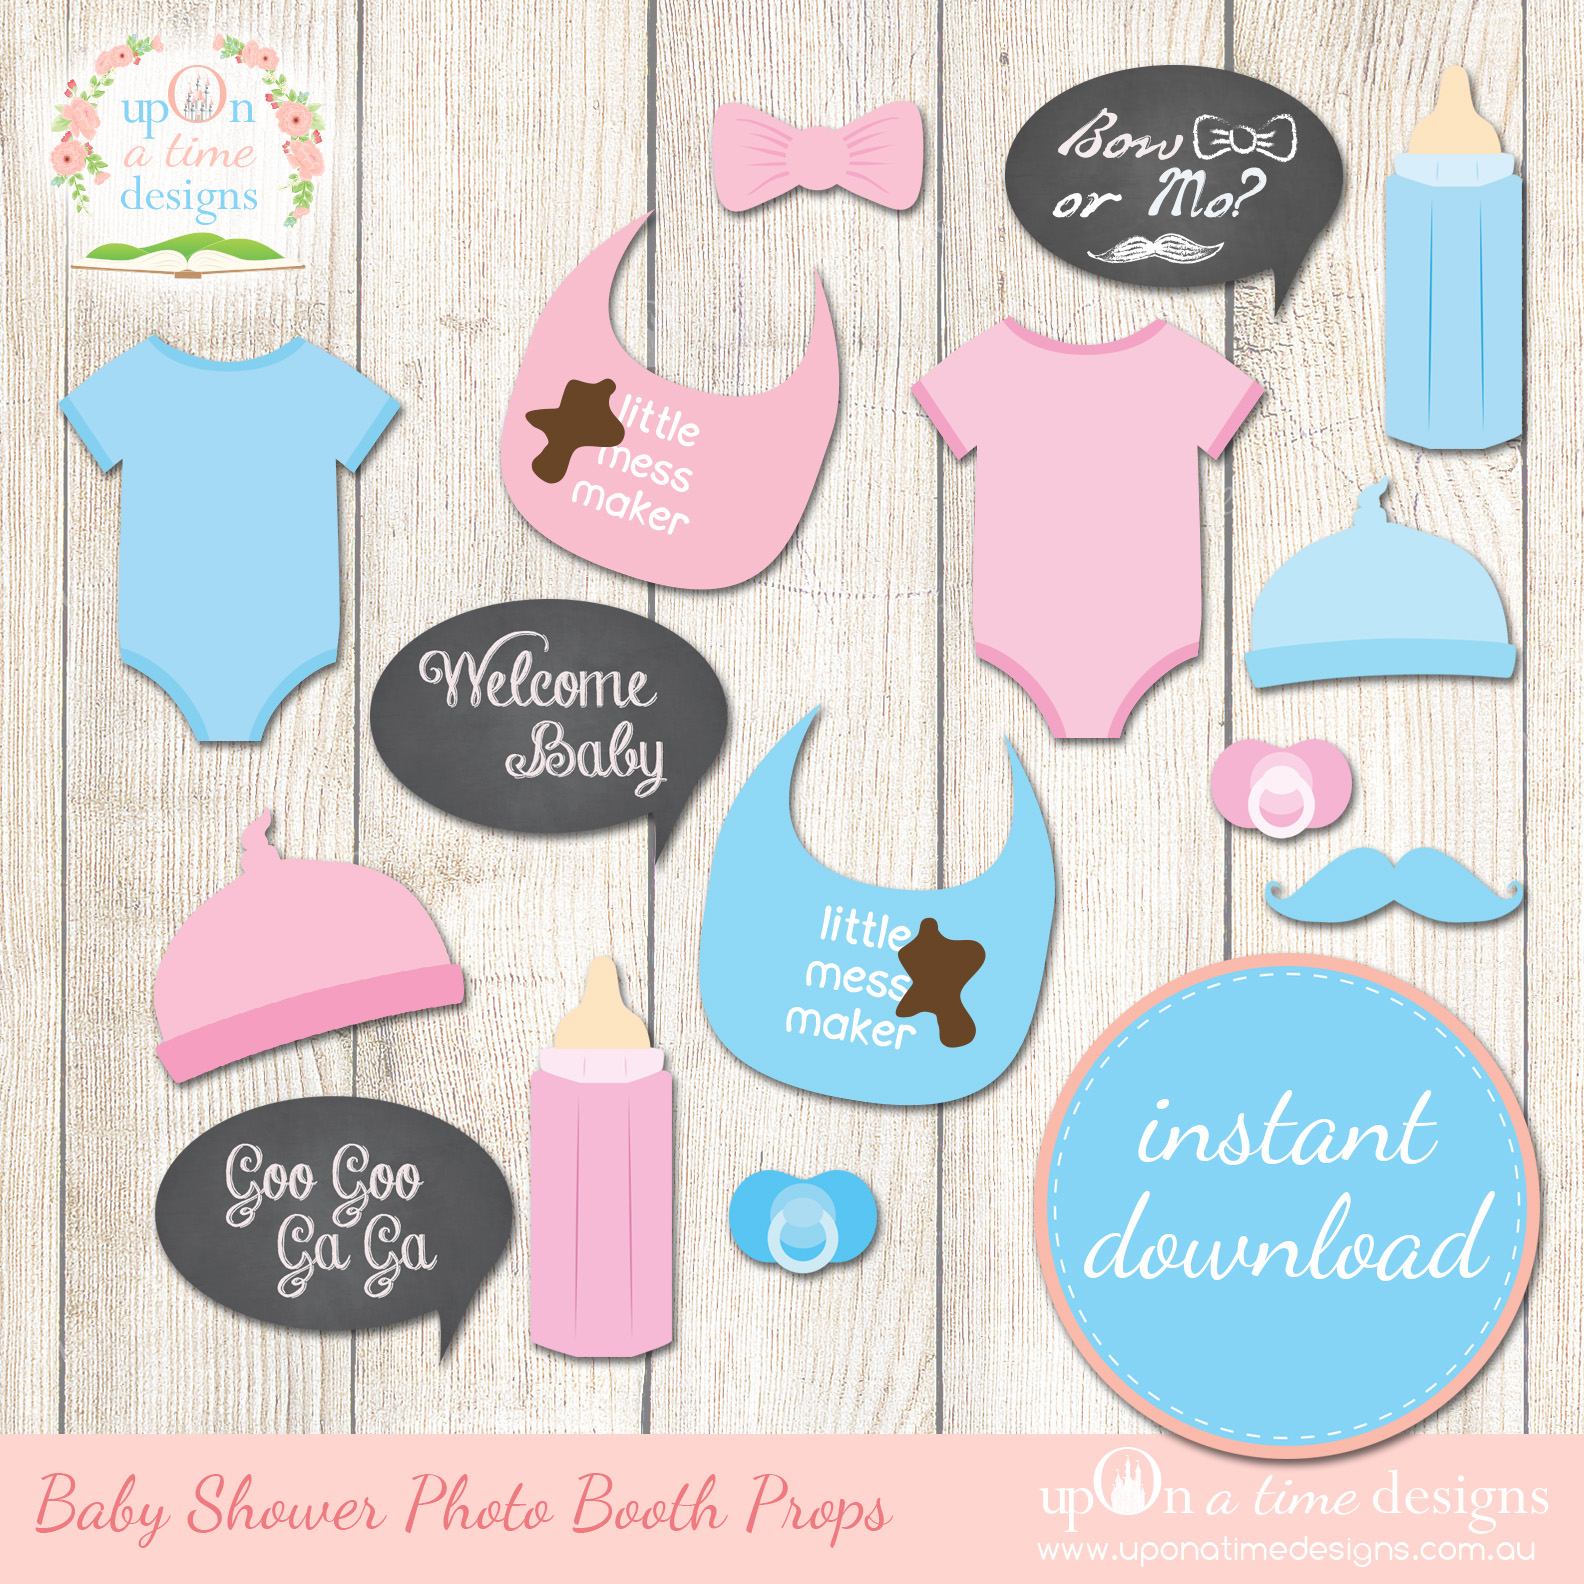 8 Best Images Of Free Printable Baby Shower Props Booth Kohler - Free Printable Boy Baby Shower Photo Booth Props